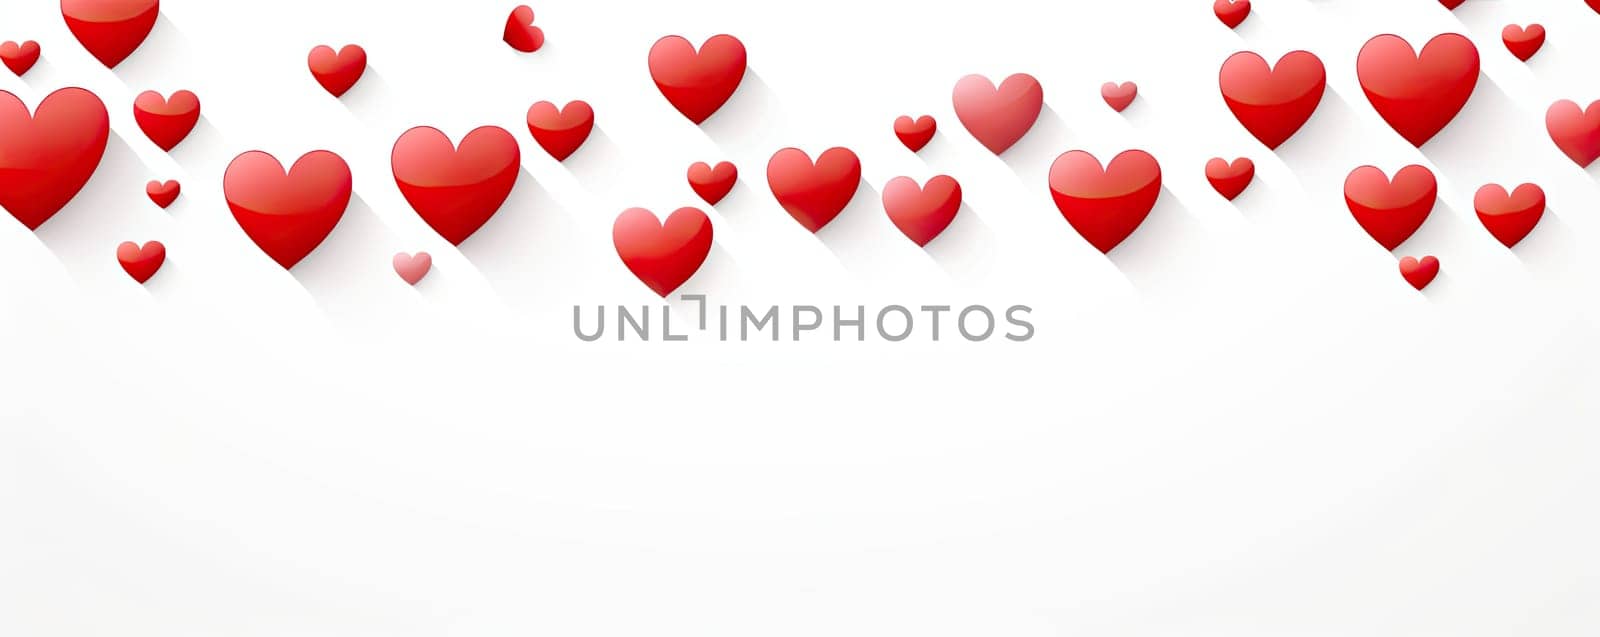 Banner with red and pink hearts on white background by Yurich32